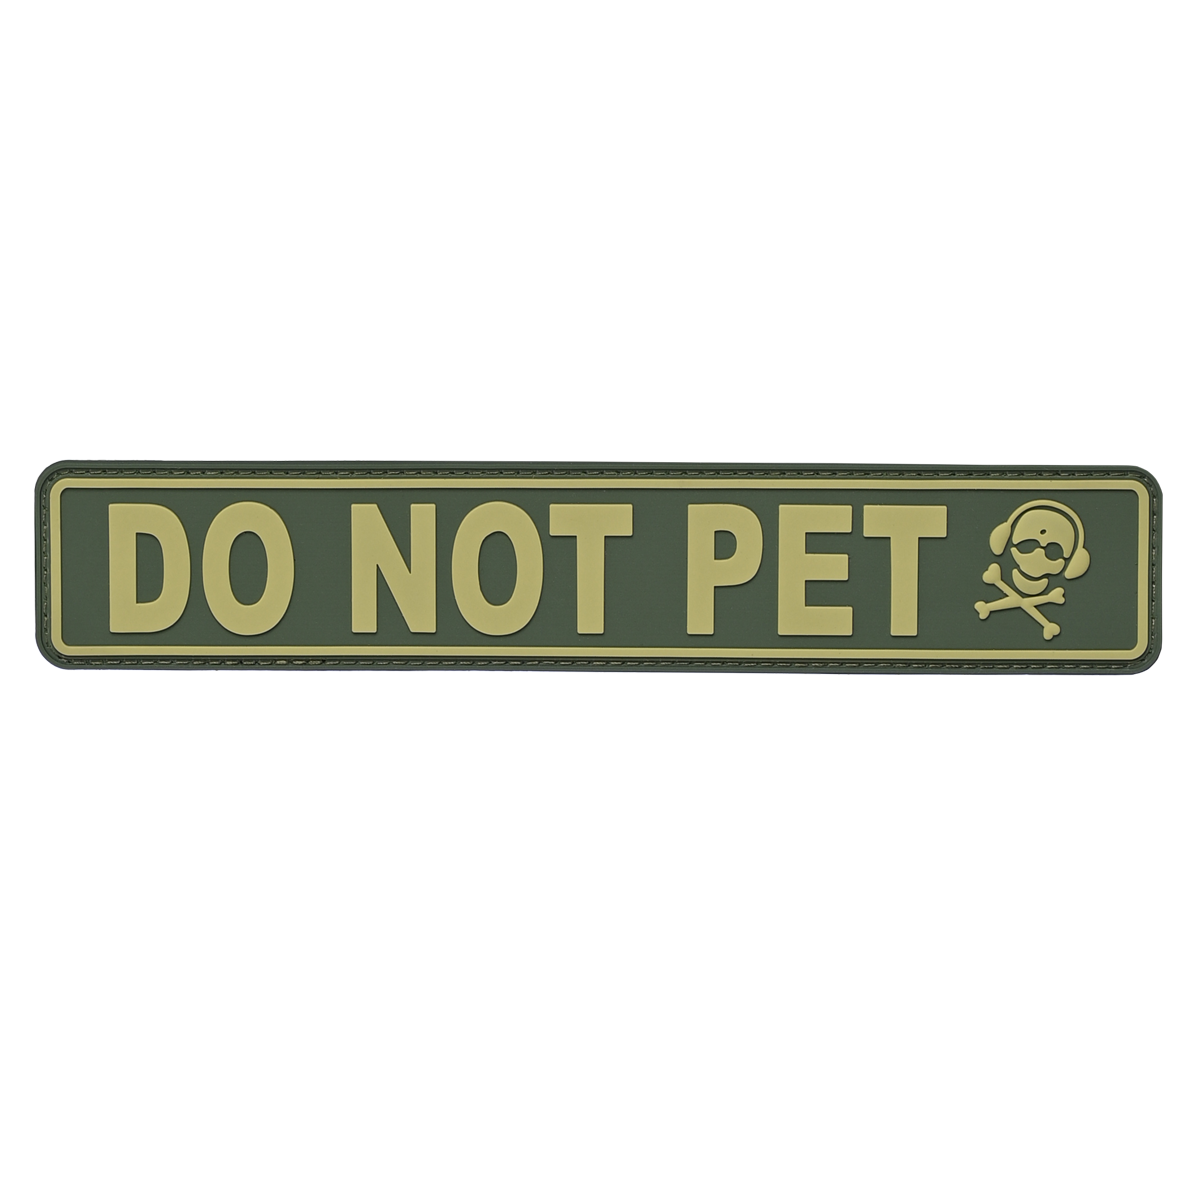 Do Not Pet PVC Patches K9 OPS  K9-OPS Rubber Training Patch for